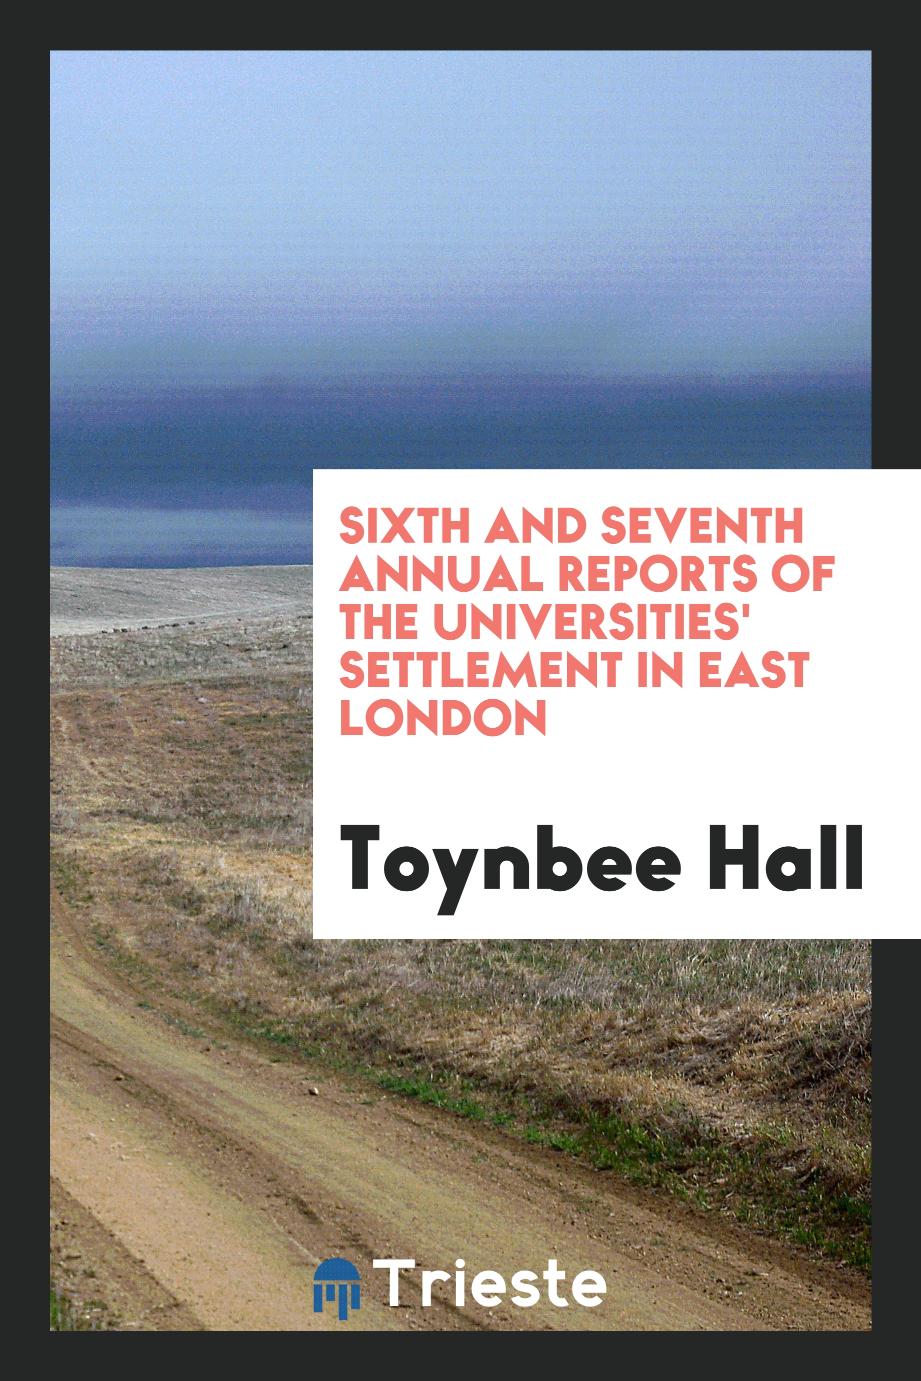 Sixth and Seventh Annual Reports of the Universities' Settlement in East London